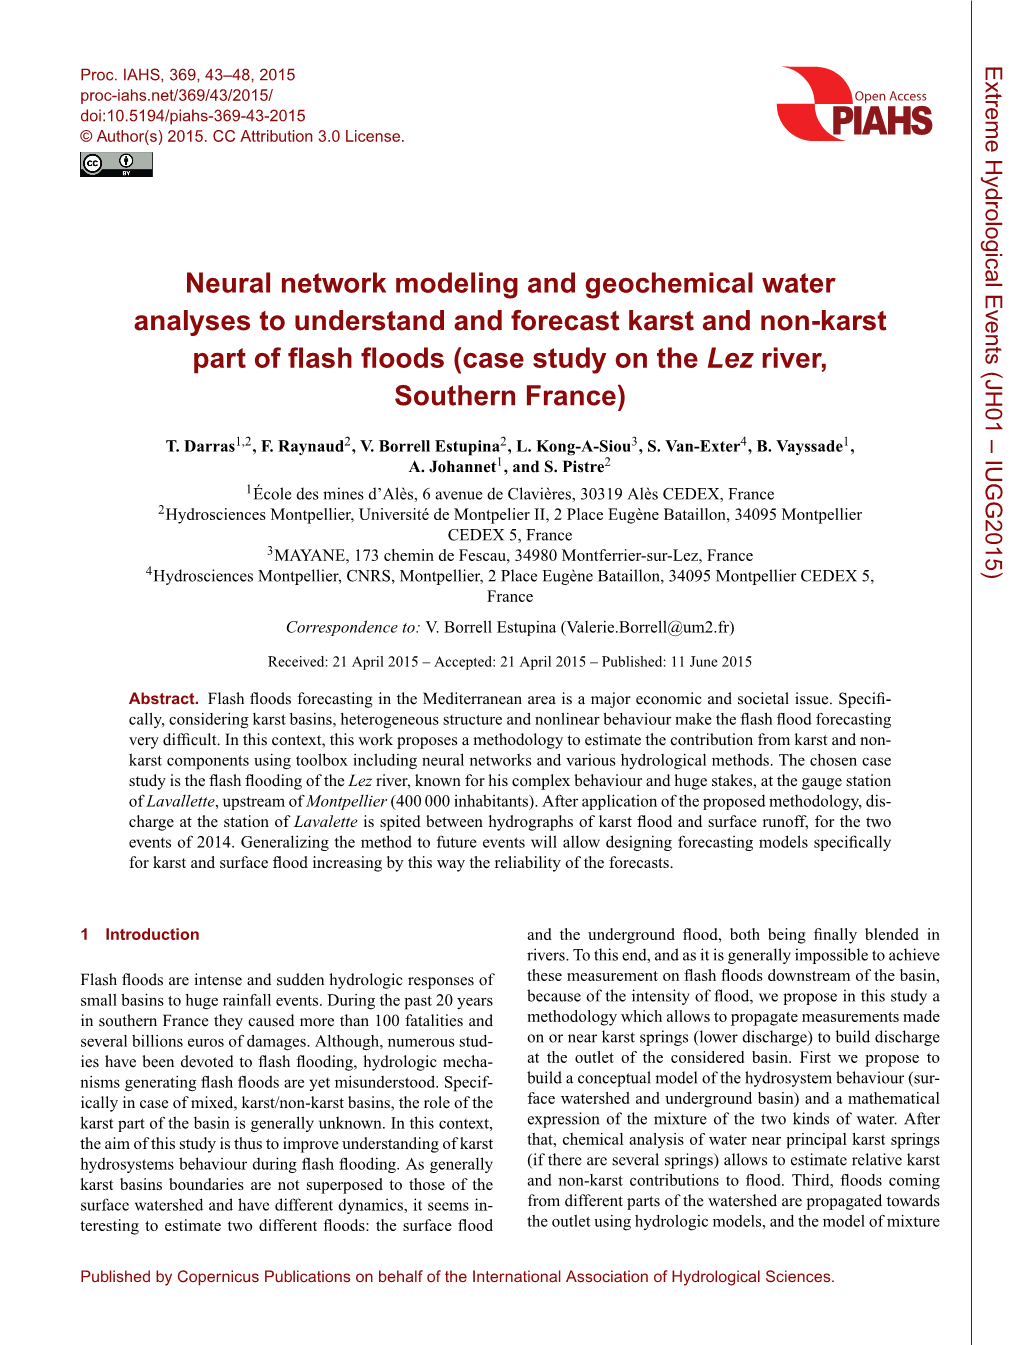 Neural Network Modeling and Geochemical